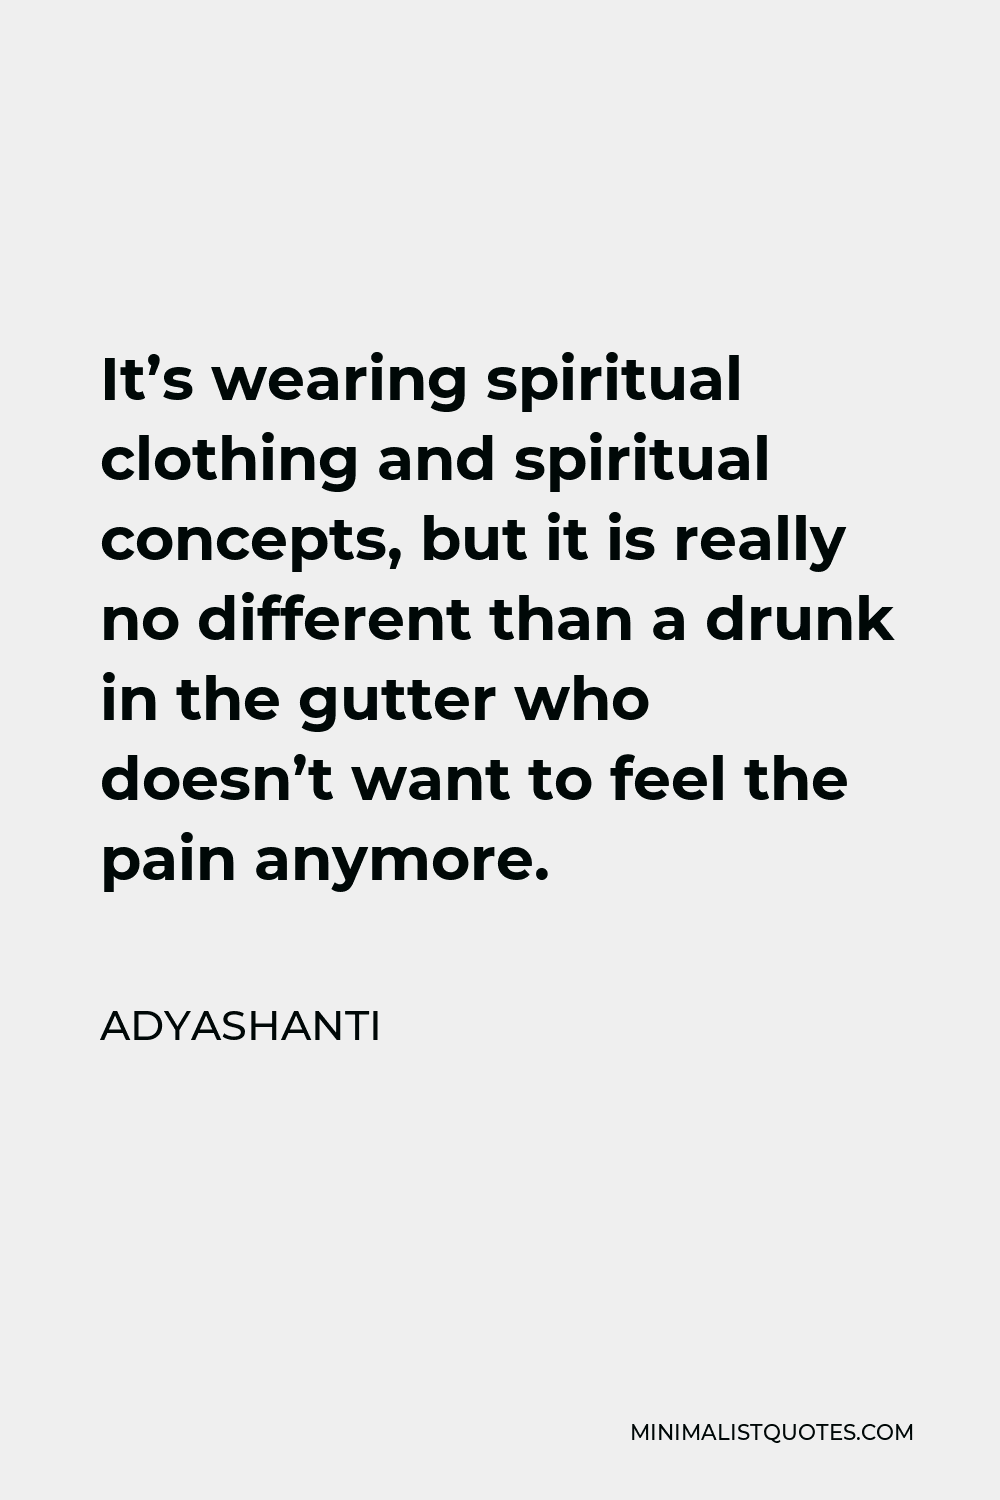 Adyashanti Quote - It’s wearing spiritual clothing and spiritual concepts, but it is really no different than a drunk in the gutter who doesn’t want to feel the pain anymore.